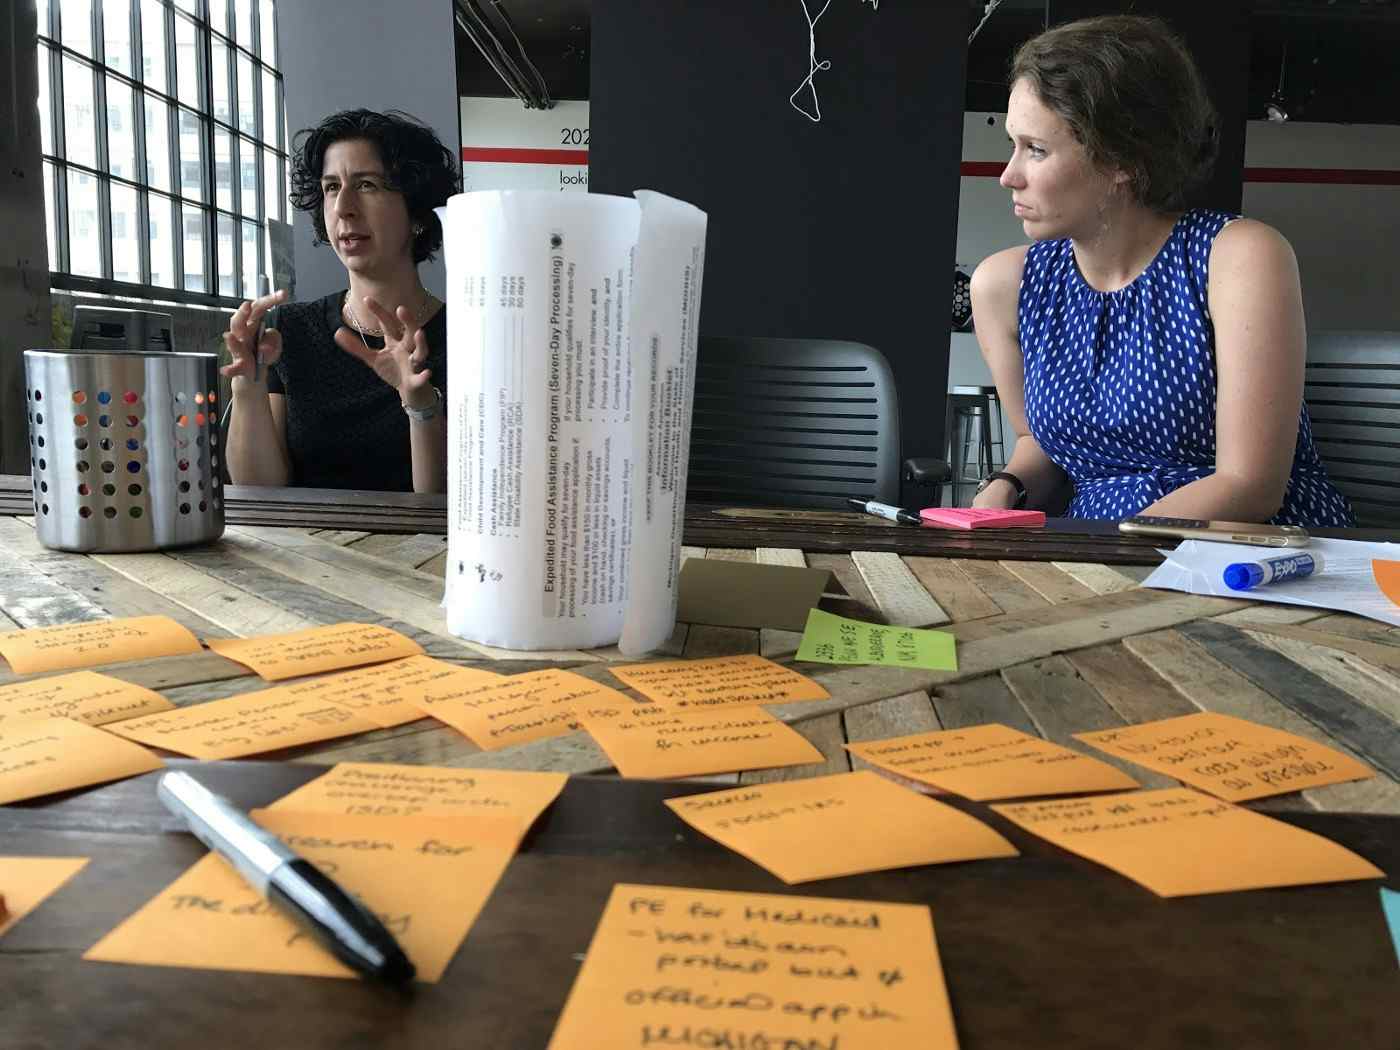 Two white women sit and discuss at a table covered in orange sticky notes.